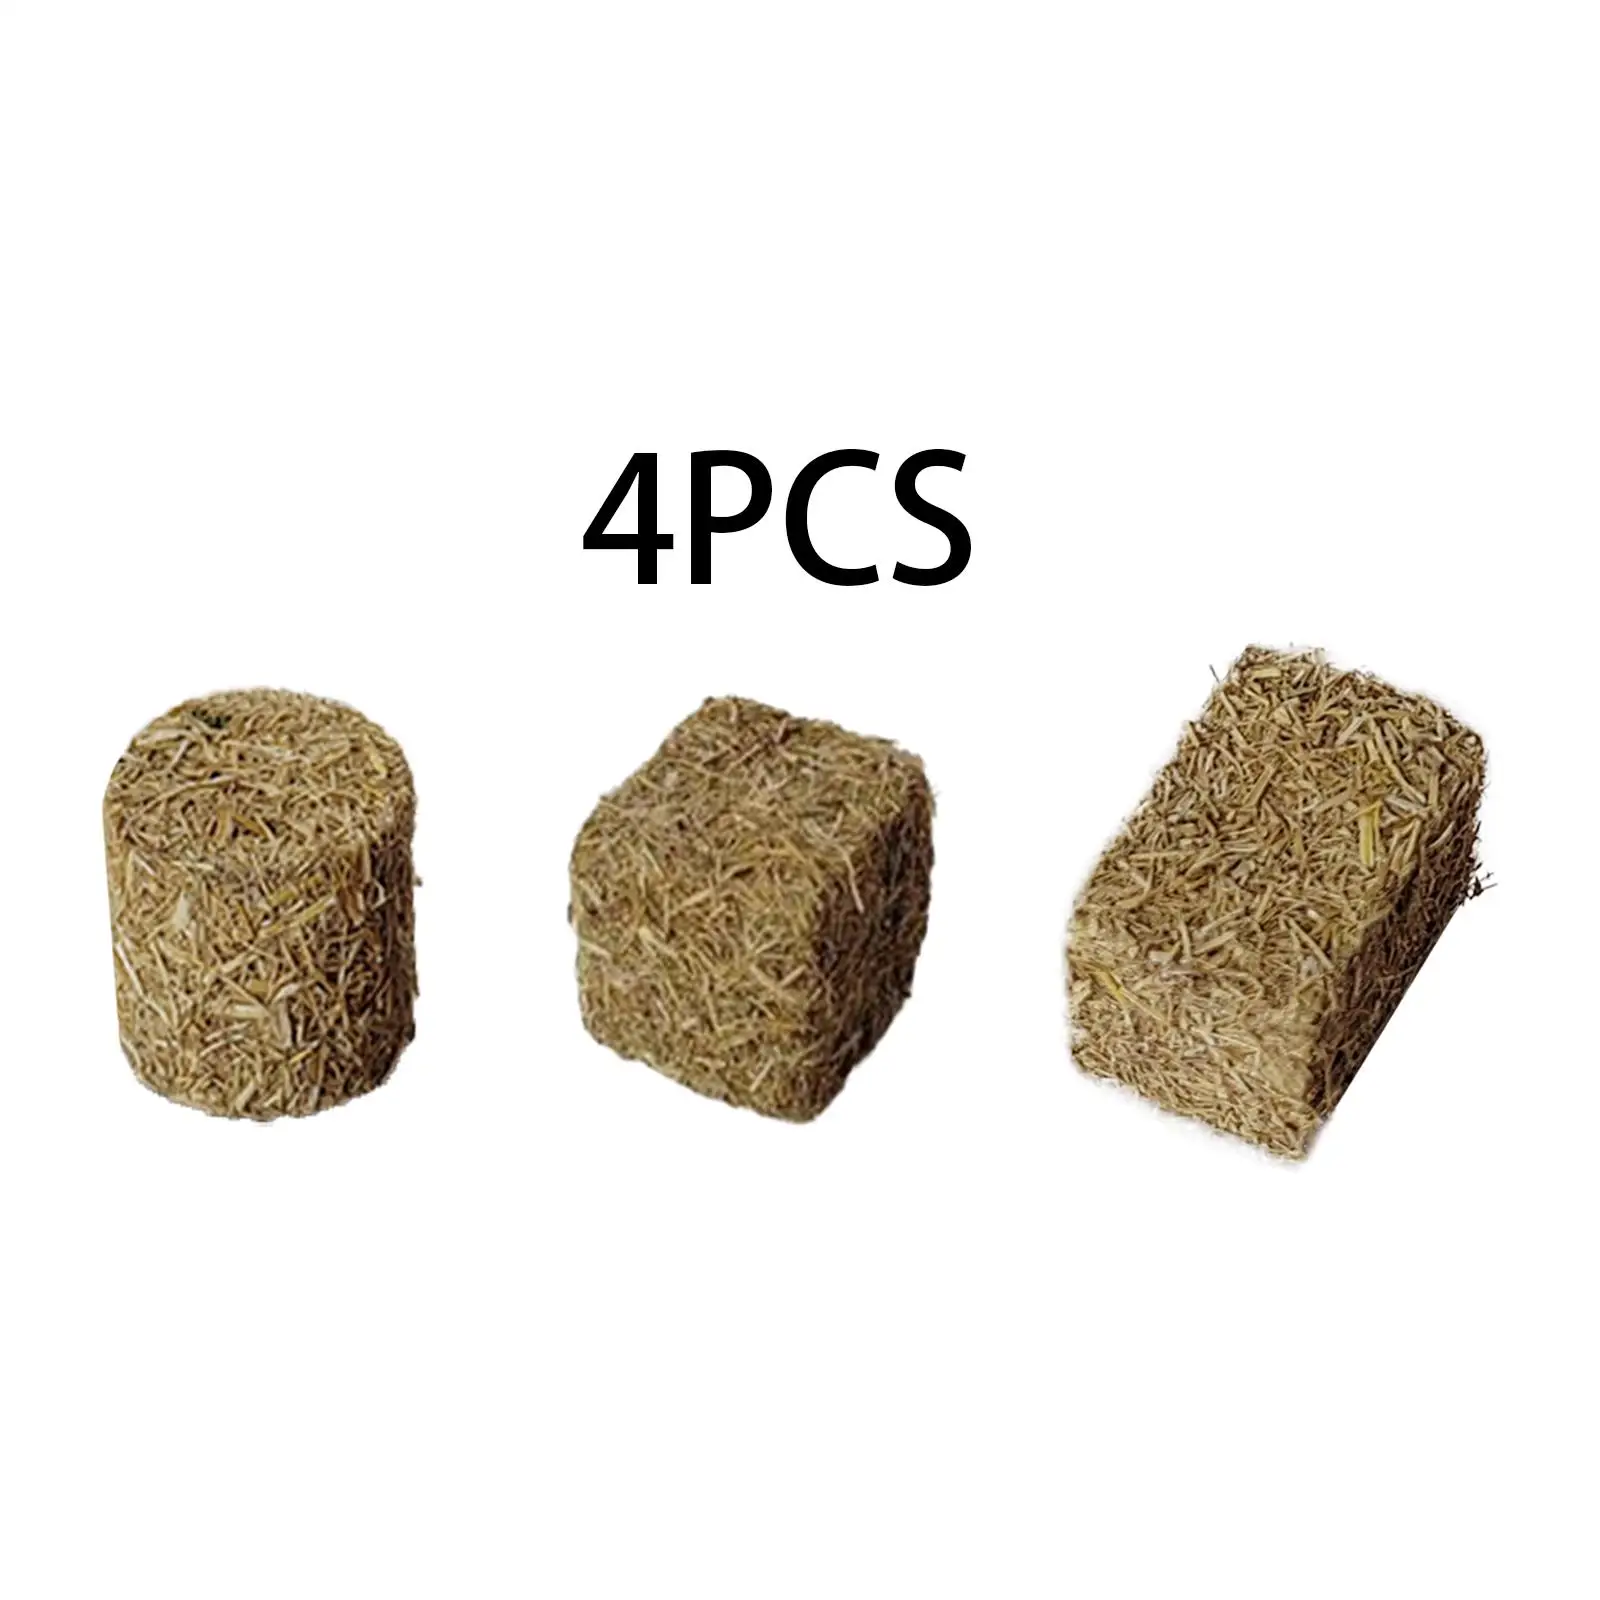 4 Pieces Mini Hay Bales Multifunction Small Decorative Hay Simulated Haystack for Handmade DIY Yard Sand Table Dollhouse